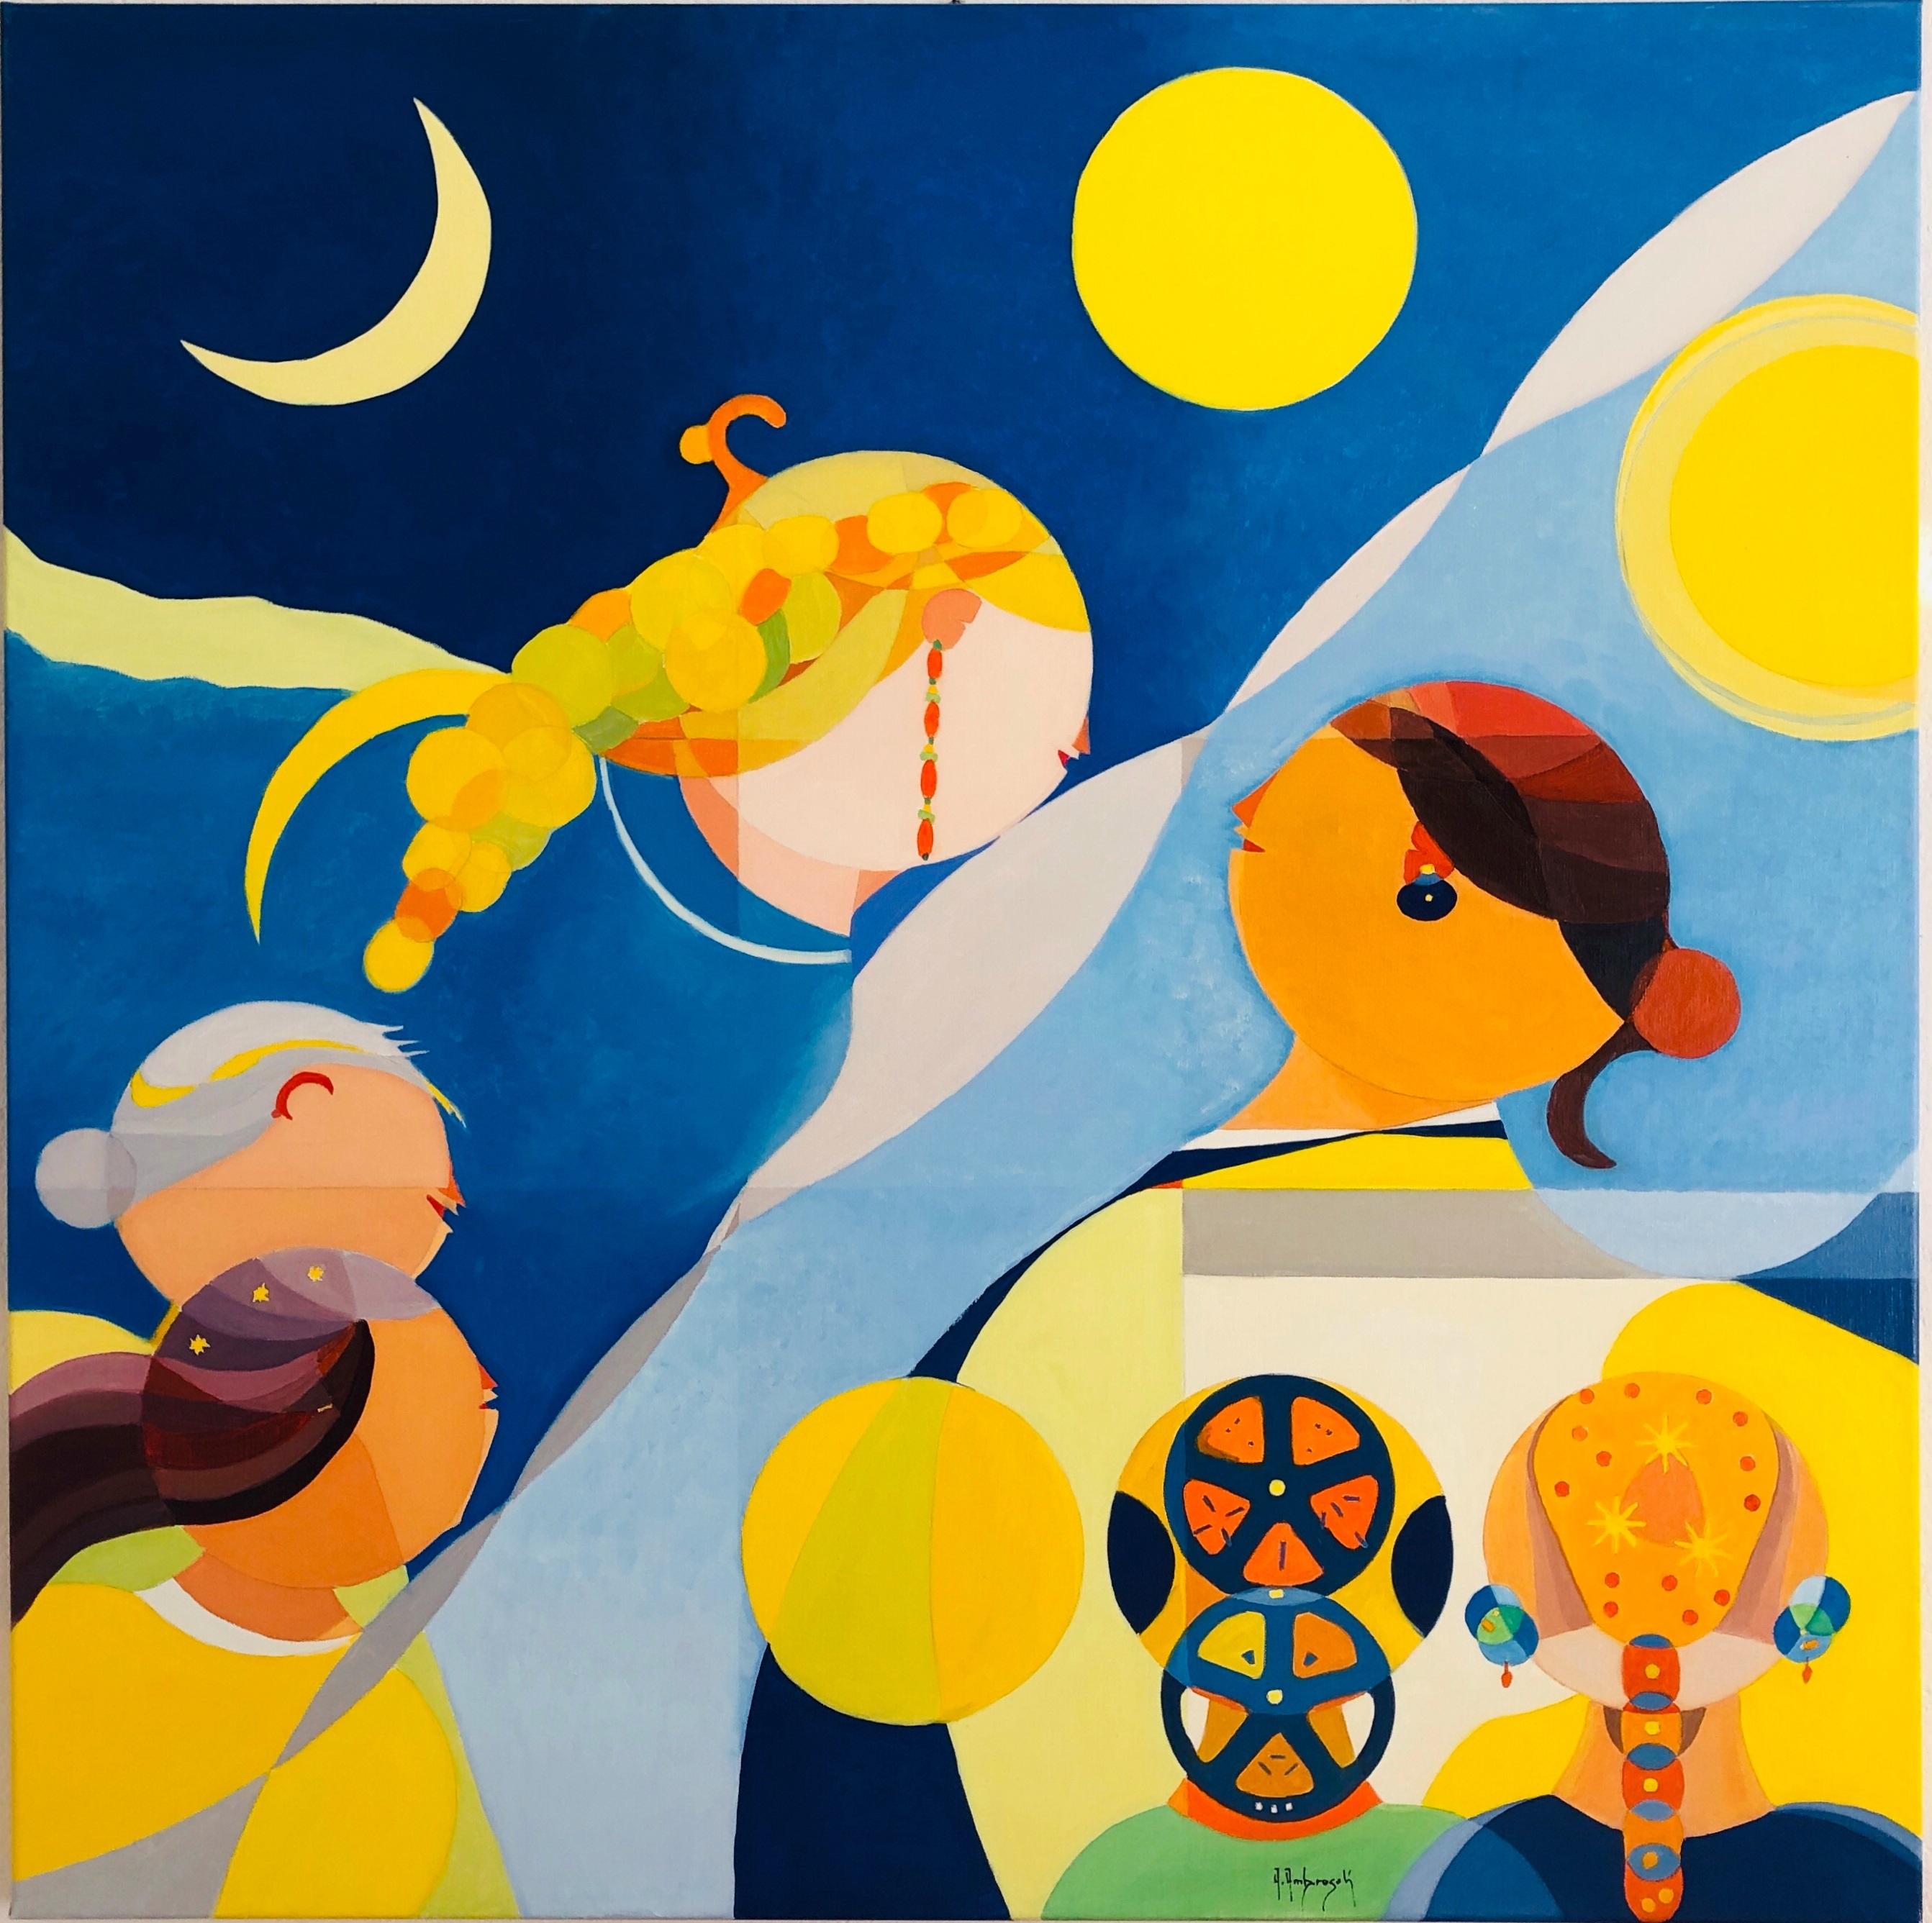 The Night meets the Day (2021), oil on canvas stretched over wooden frame, 96x95 cm, by Italian contemporary artist Annemarie Ambrosoli (ICA - International Certified Artist)

"The Night meets the Day" is represented with two main figures that meet